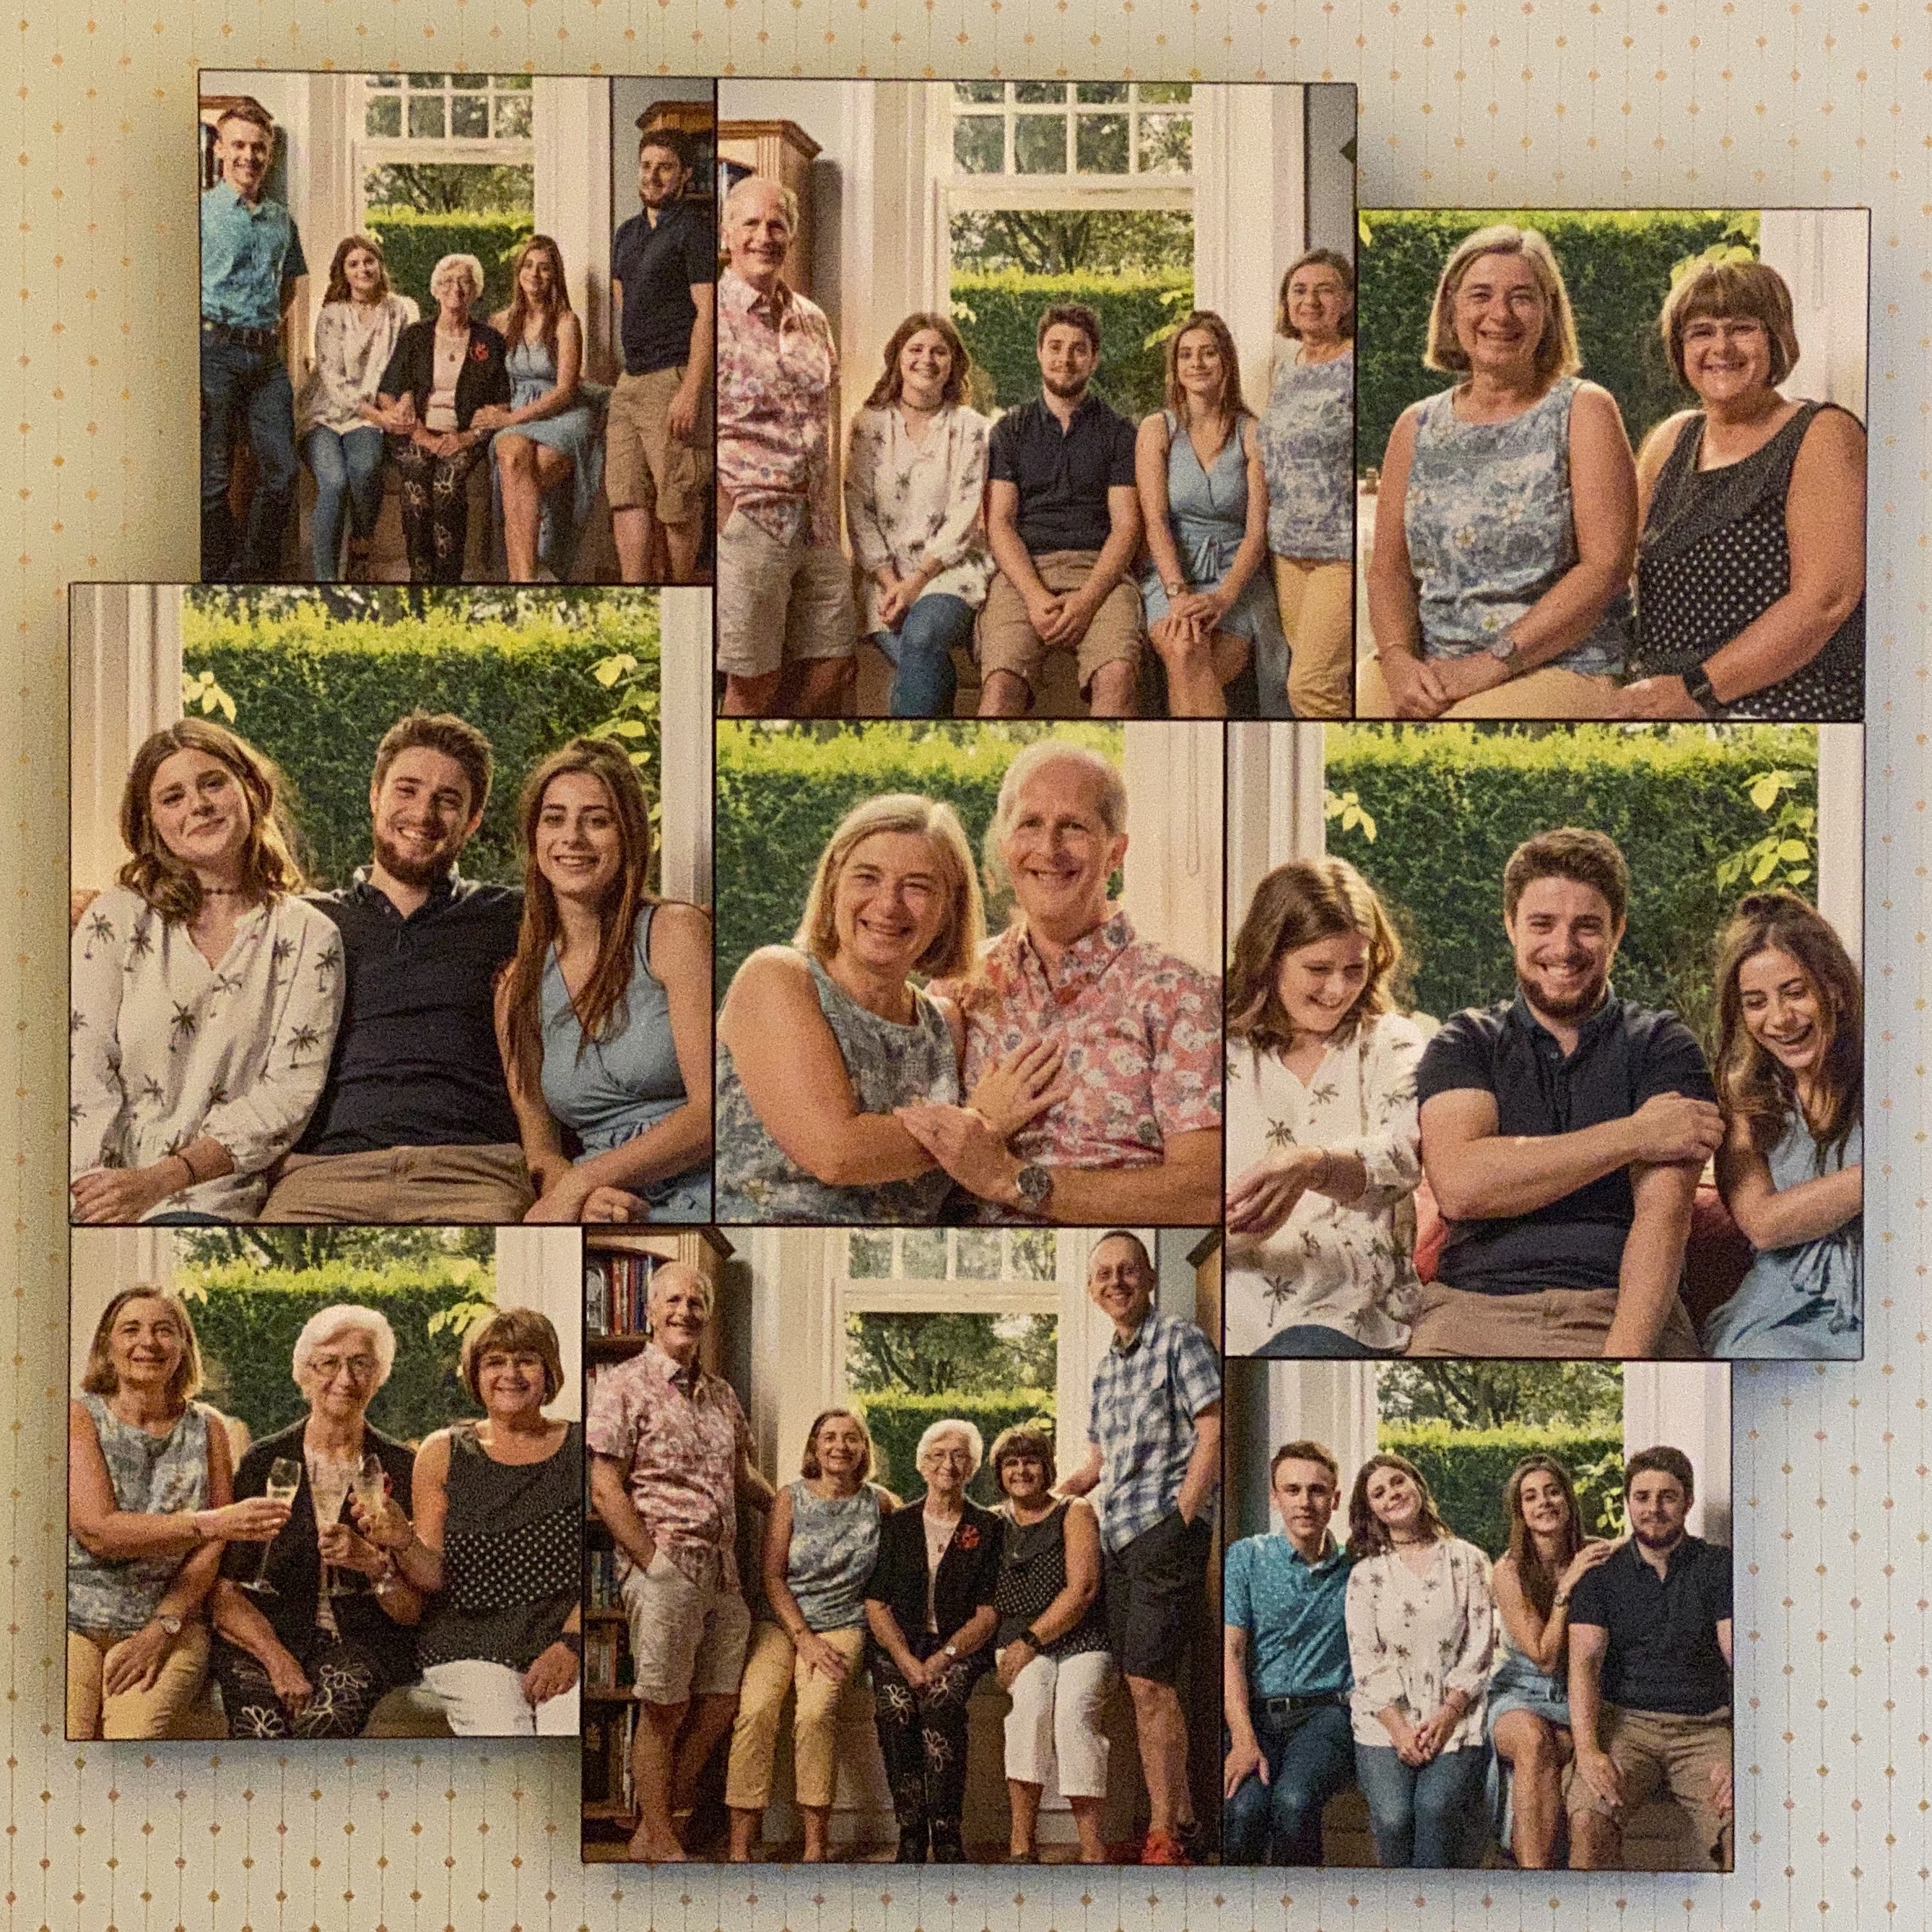 Ensemble on spotty wallpaper. A collection of 9 family photos together.